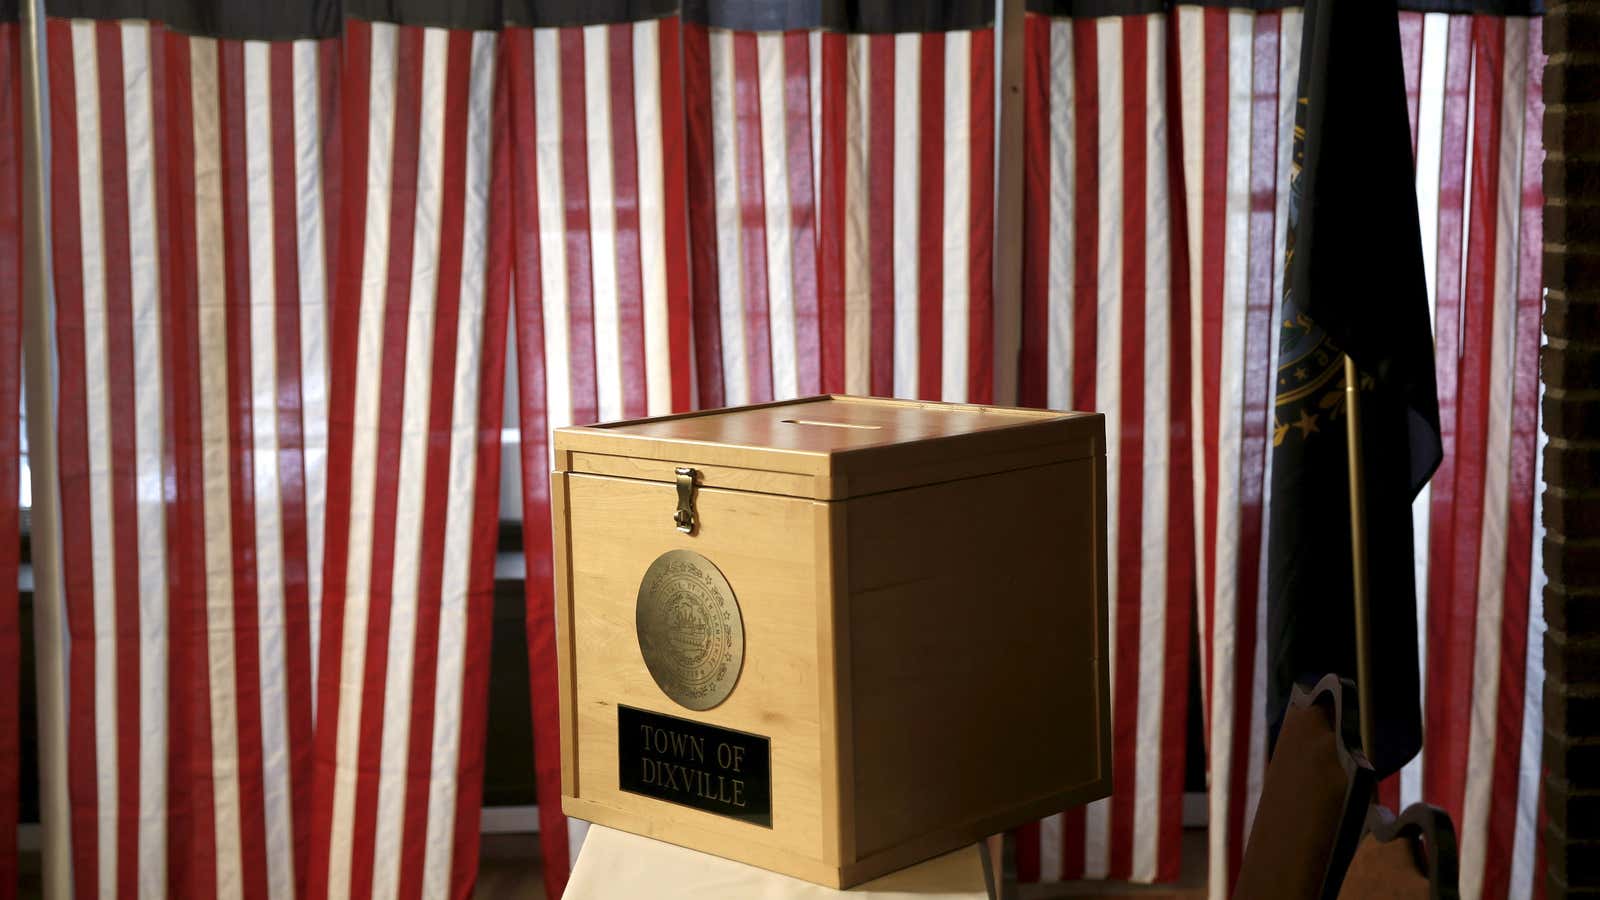 Put your vote in the box.